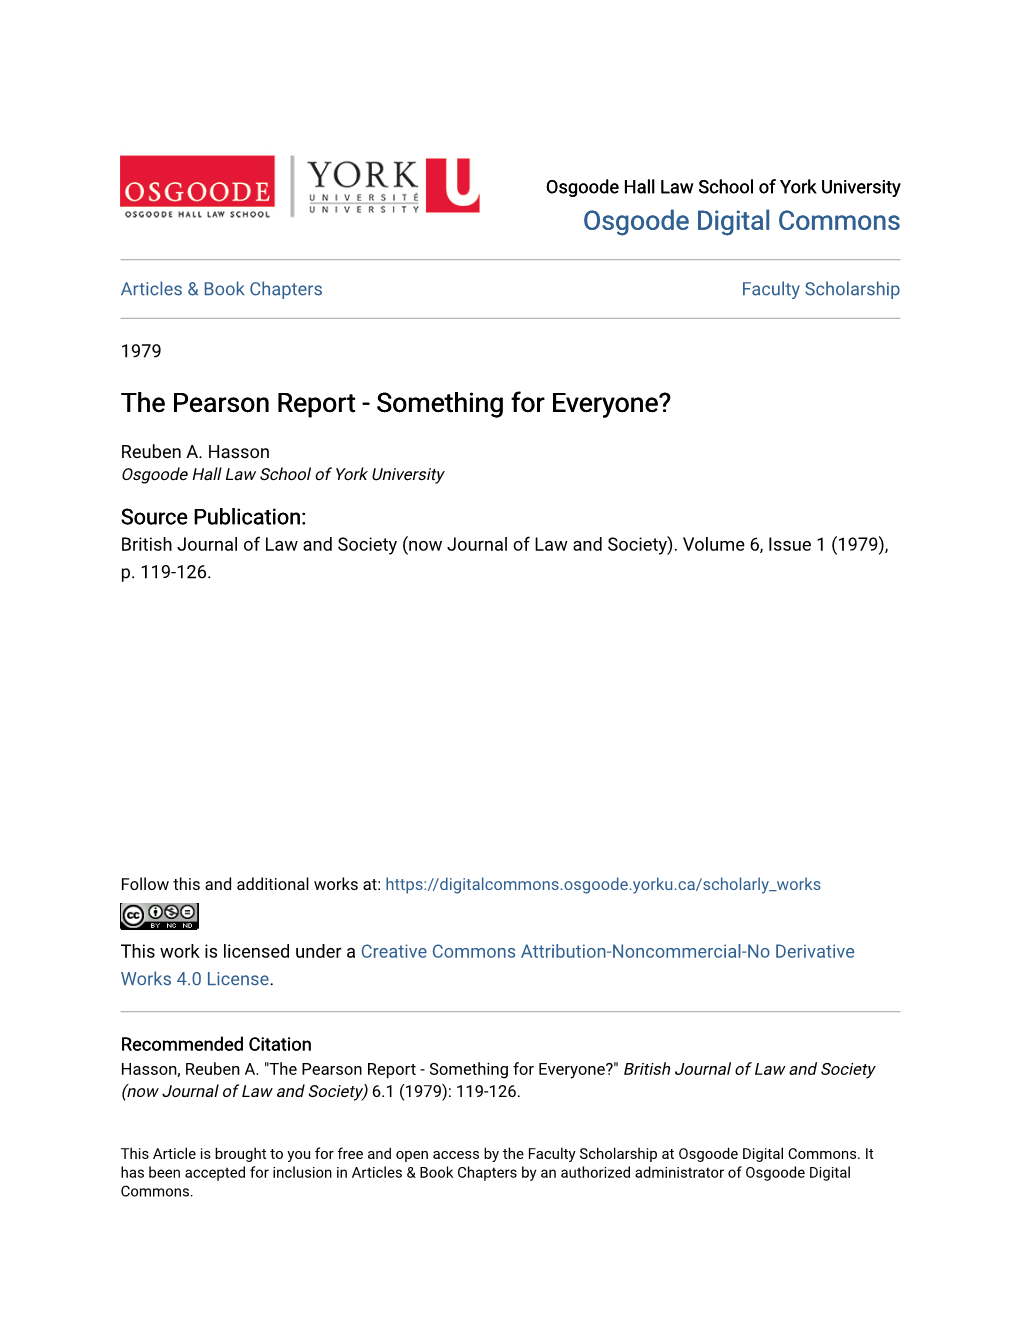 The Pearson Report - Something for Everyone?